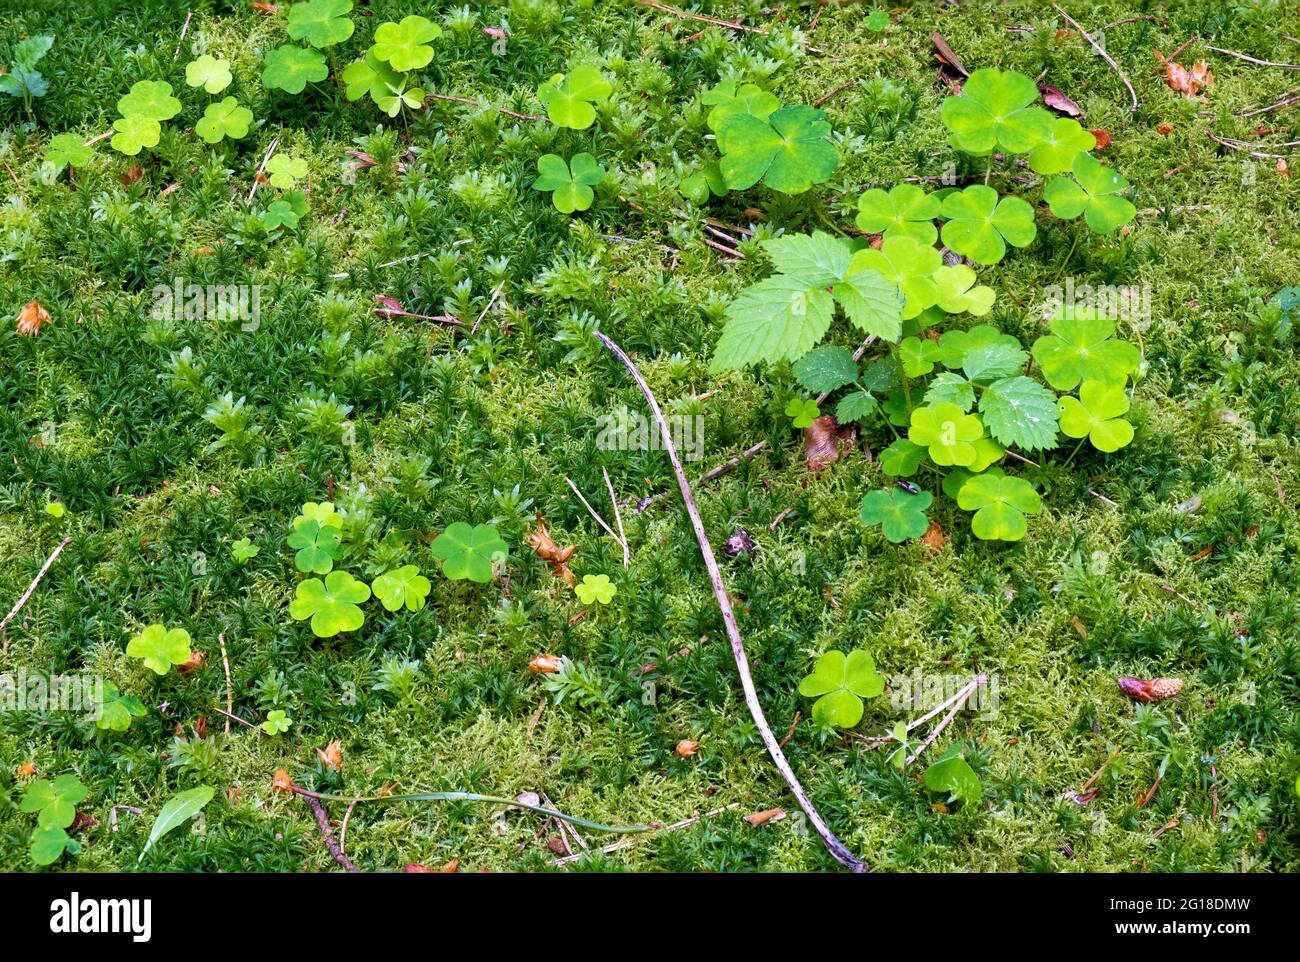 Still life closeup of different green plants on a fertile forest floor Stock Photo